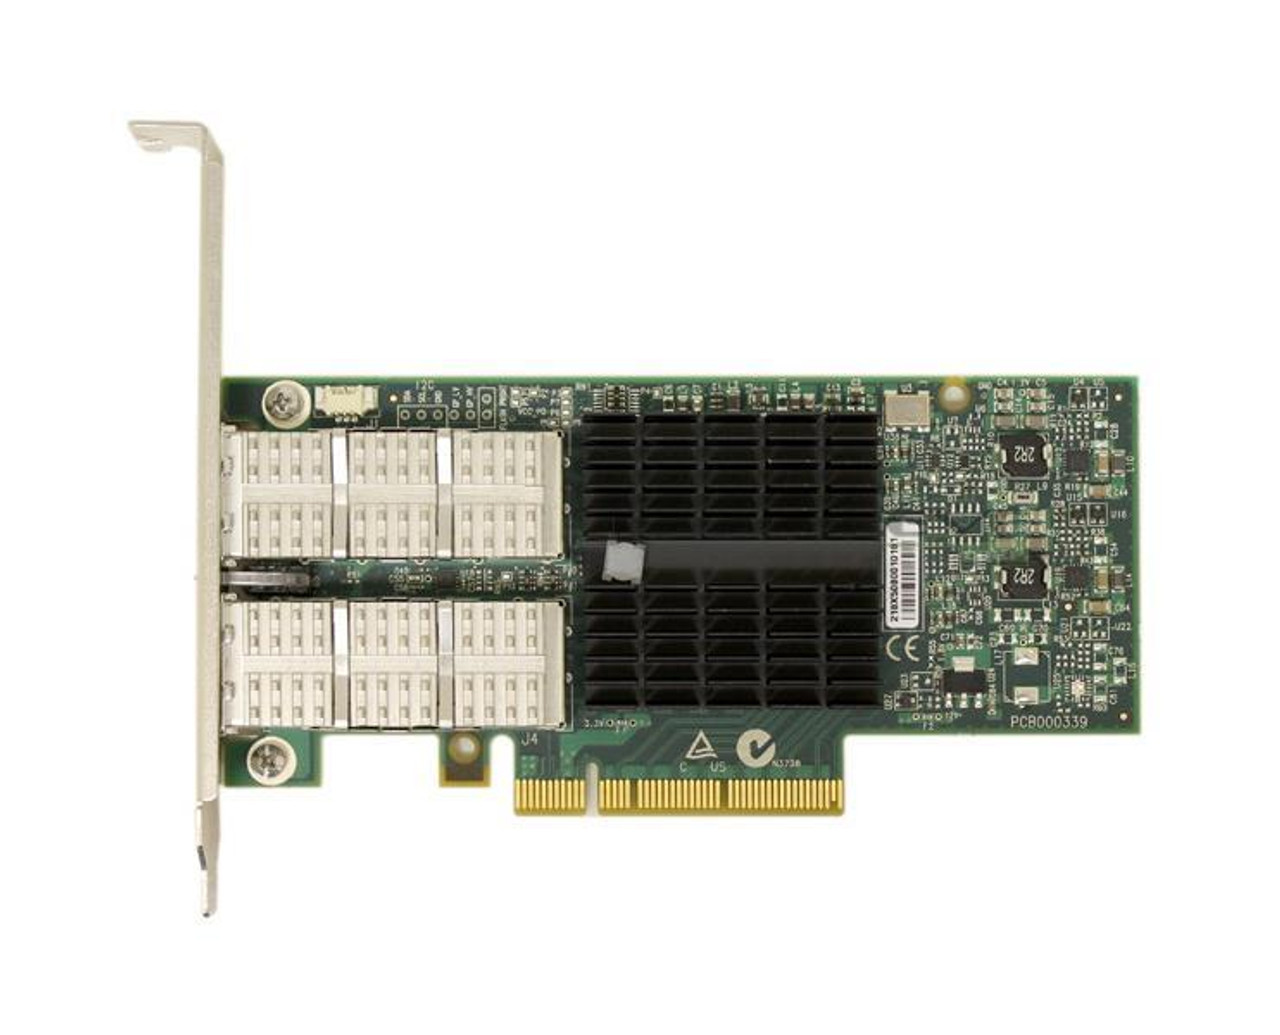 MCX354A-QCBT-HPE Mellanox ConnectX-3 Dual-Ports 56Gbps QSFP+ 10 Gigabit Ethernet PCI Express 3.0 x8 Network Adapter with VPI